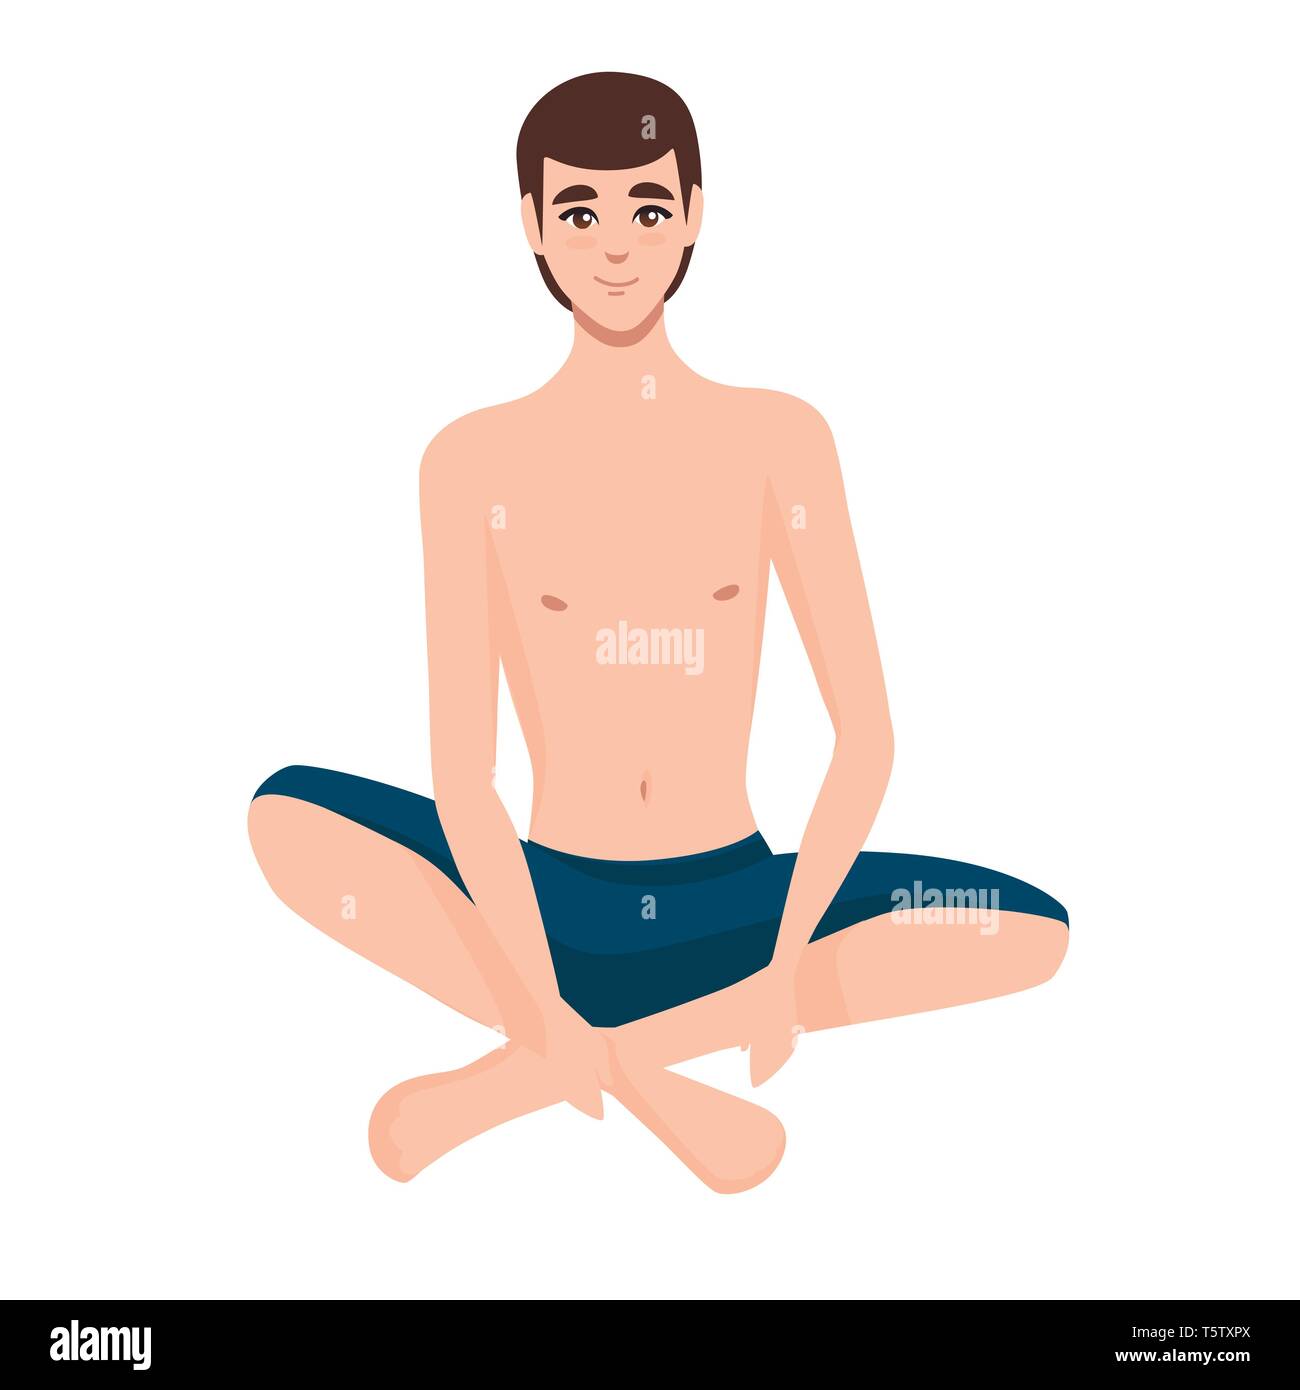 Men wear blue swimsuit sitting. Beach shorts. Cartoon character design. Flat vector illustration isolated on white background. Stock Vector